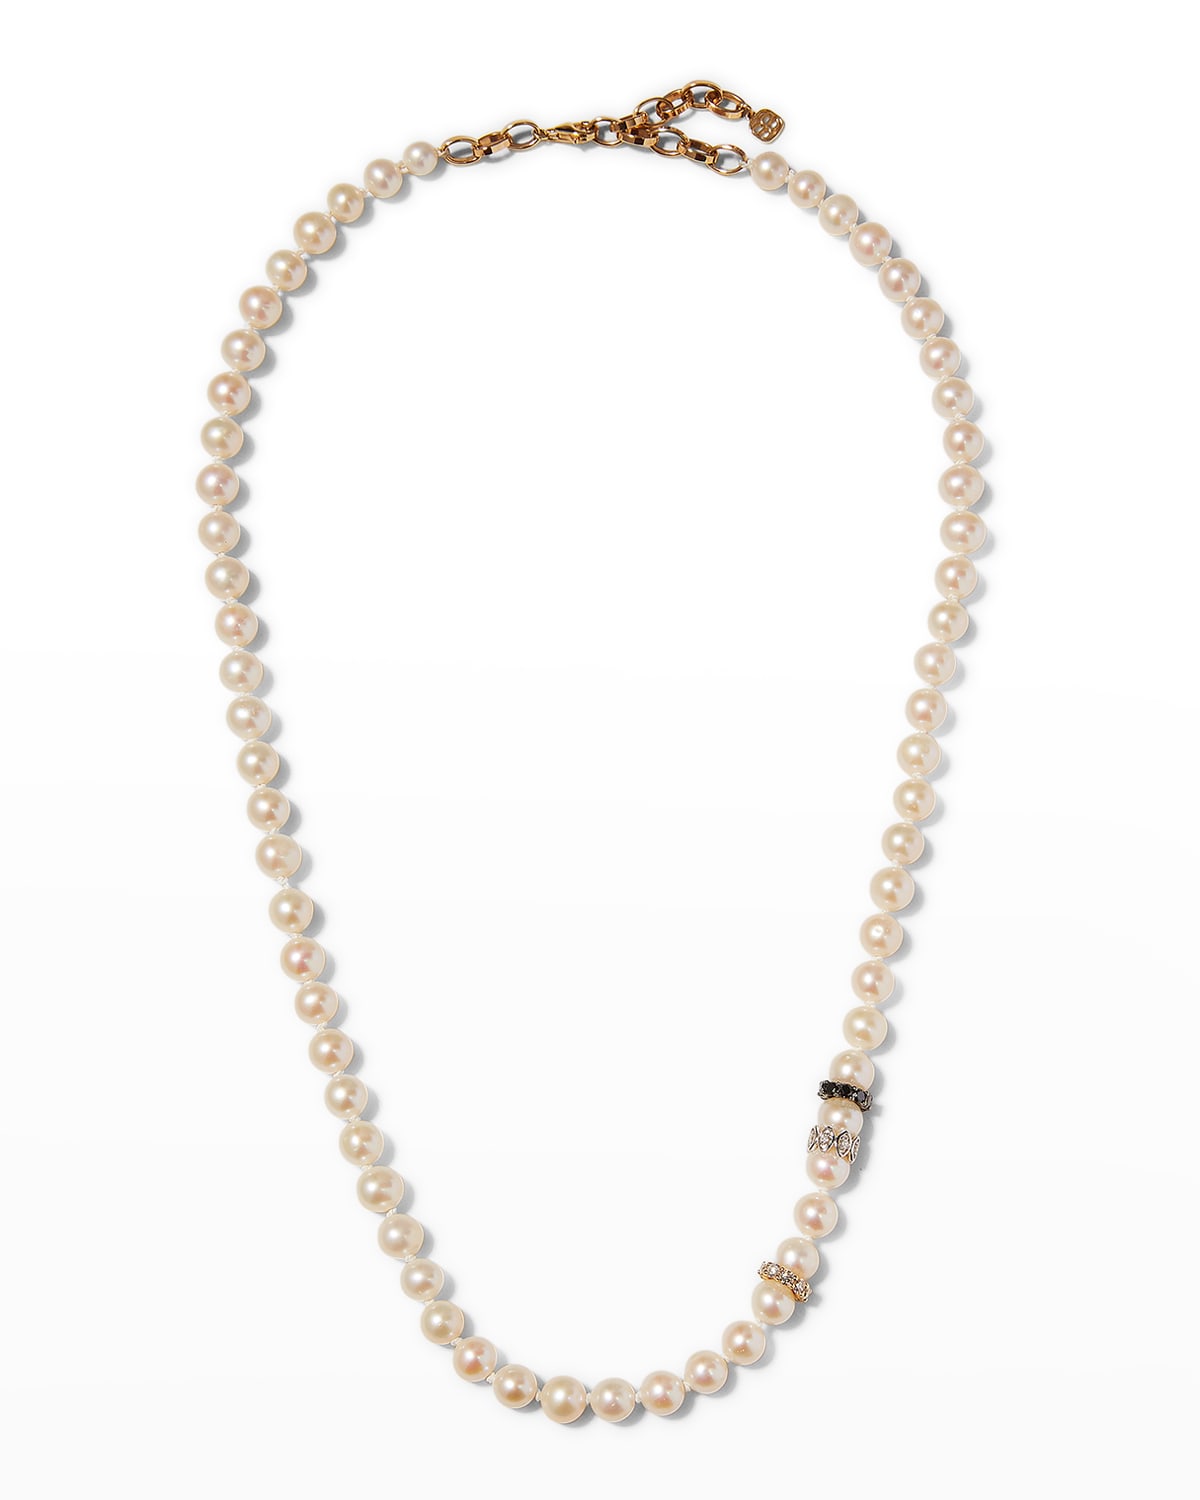 Men's Freshwater Pearl Necklace w/ White and Black Diamonds